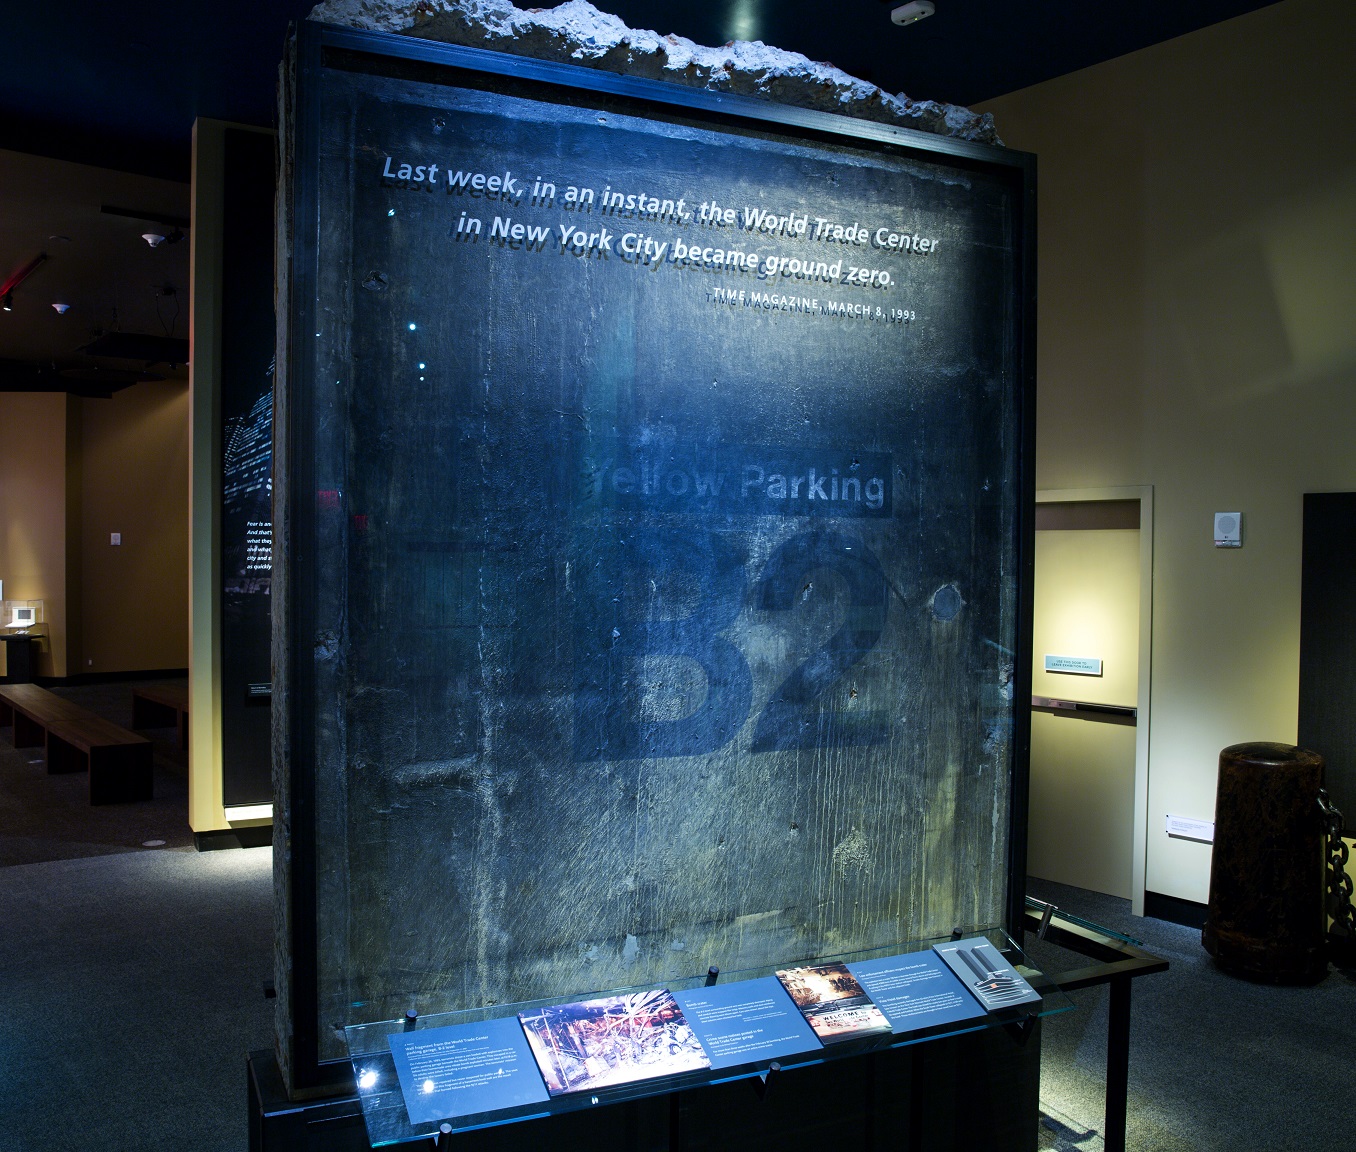 A slab of concrete from the parking garage at the World Trade Center is displayed in a part of the 9/11 Memorial Museum documenting the 1993 bombing. The concrete reads “Yellow Parking B2.”